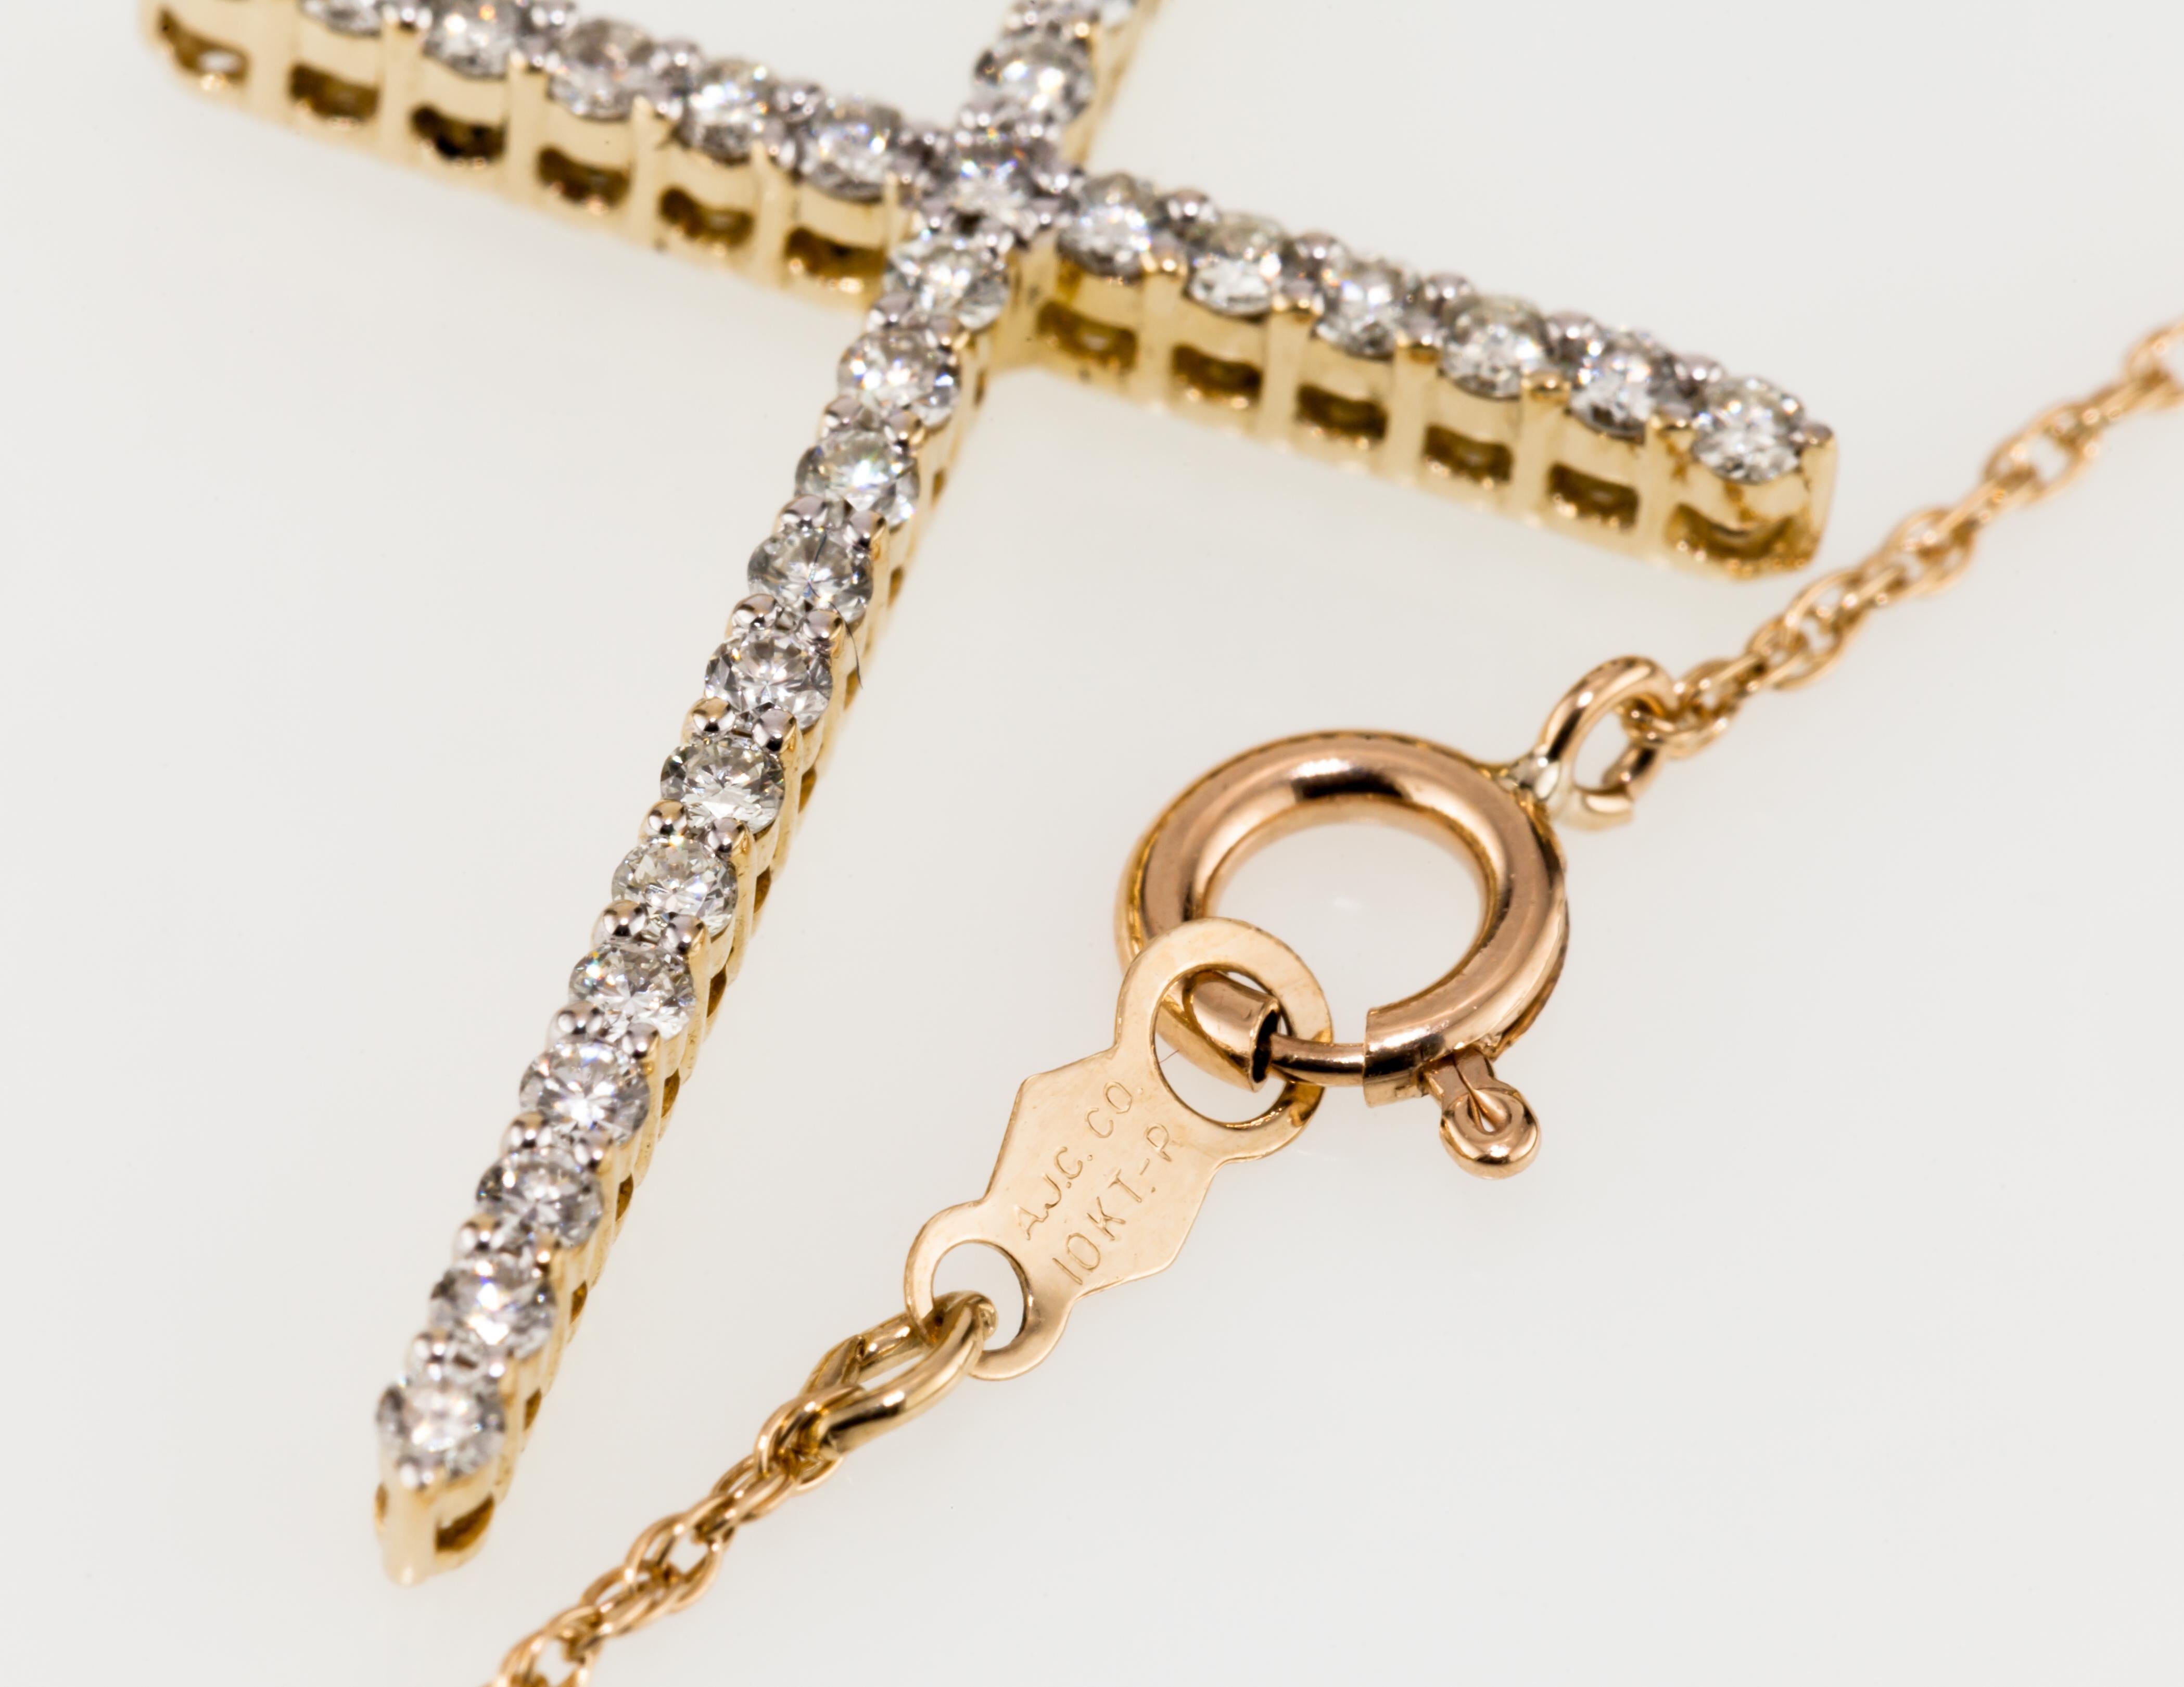 0.56 Carat Diamond Cross Pendant in Yellow Gold with Chain For Sale 2